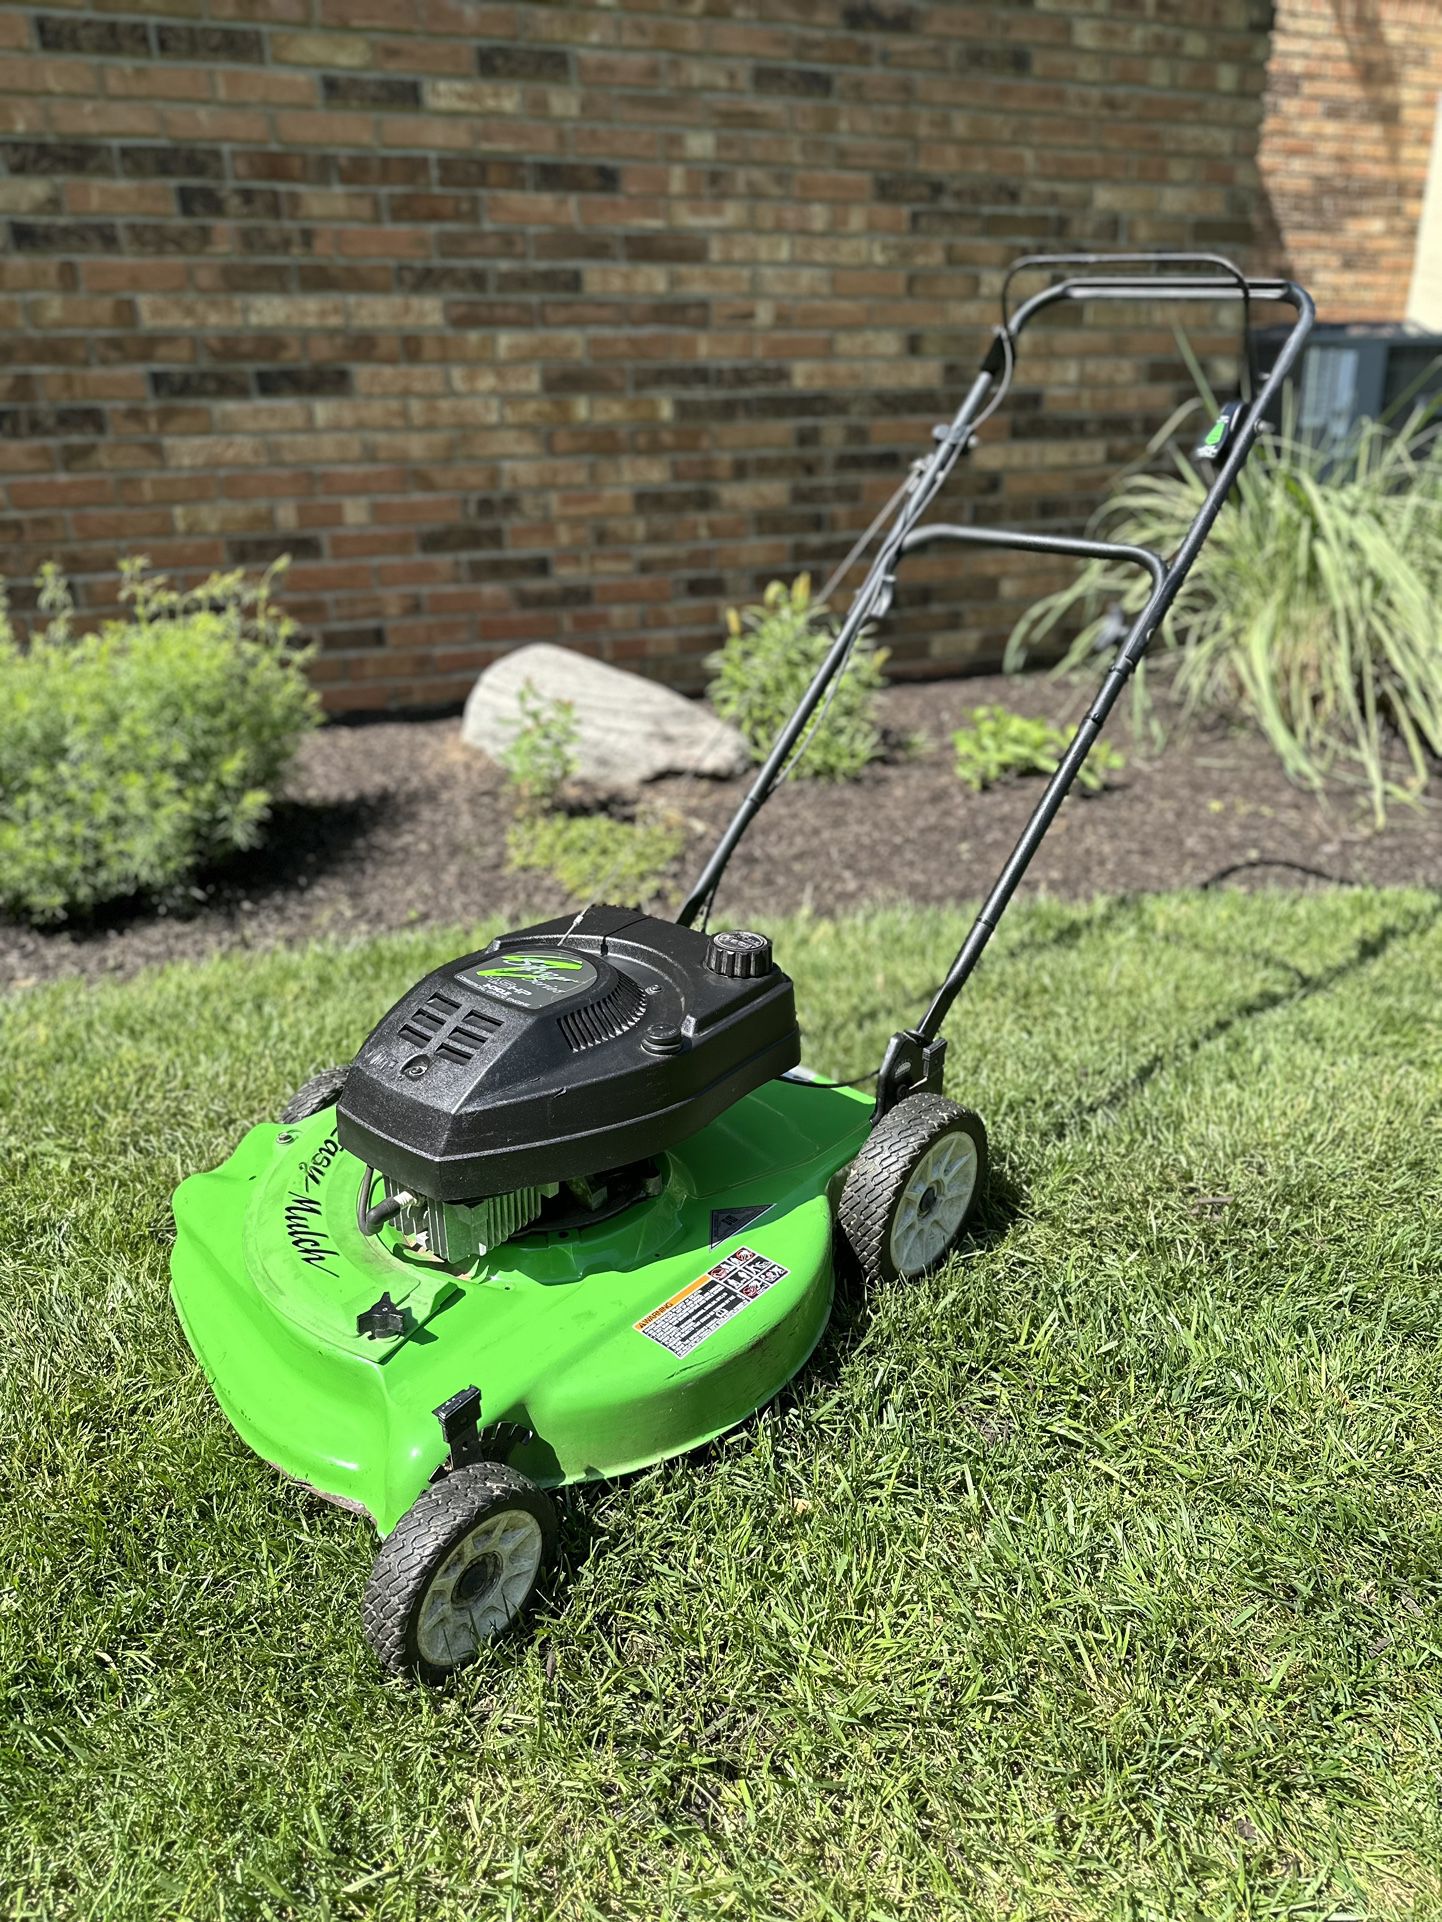 Lawnboy Commercial Silver Series PUSH lawnmower - Works Great 